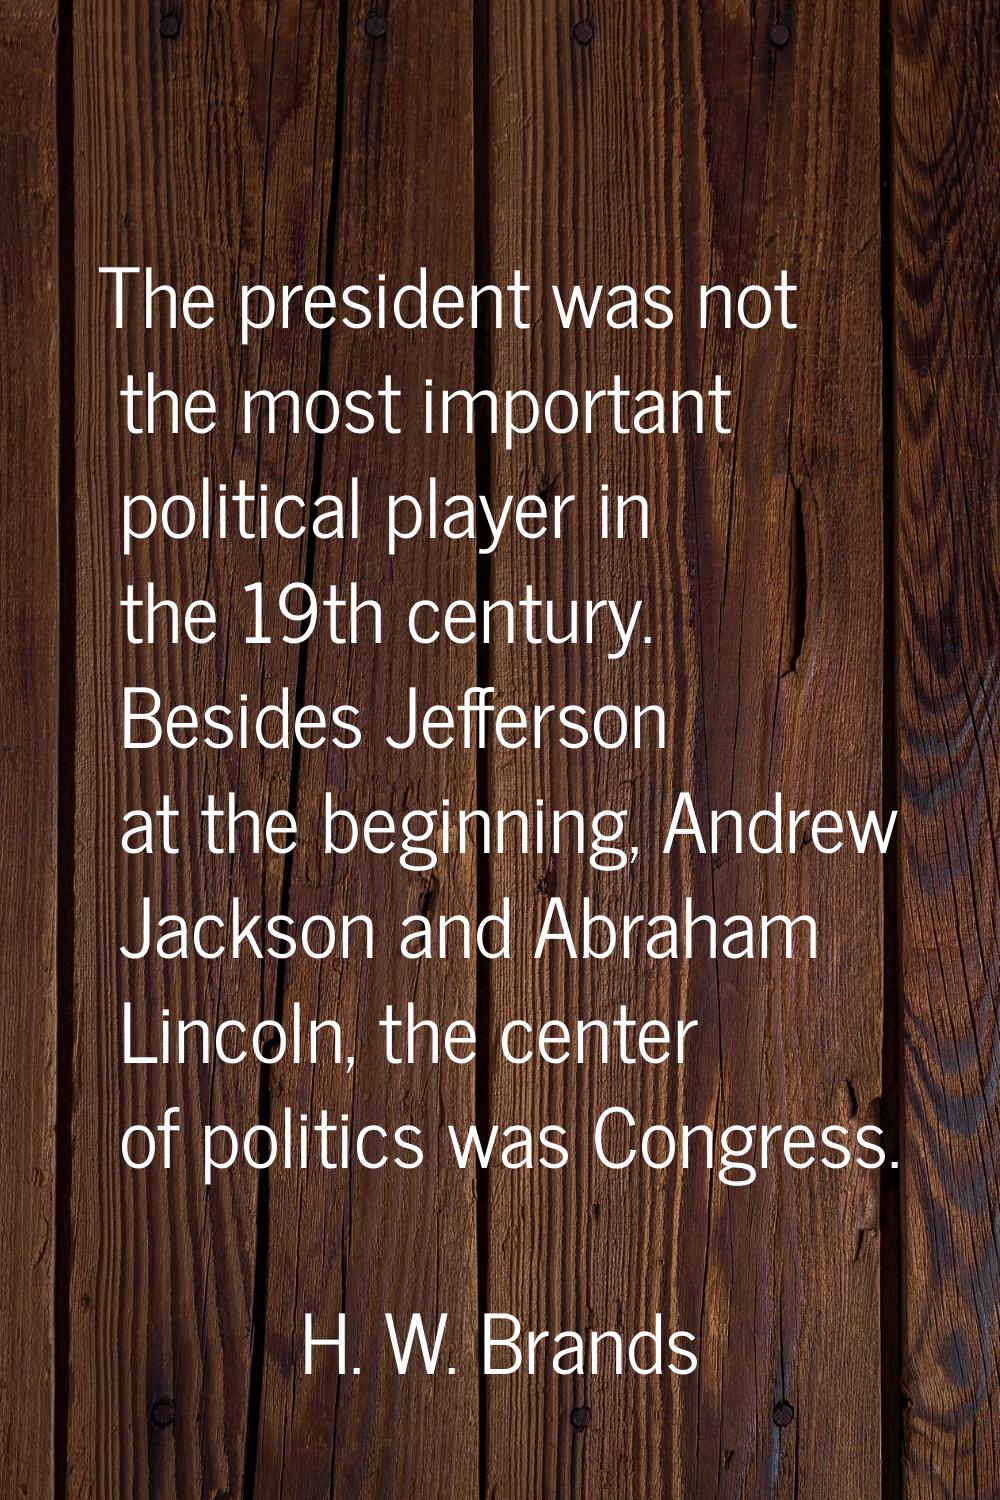 The president was not the most important political player in the 19th century. Besides Jefferson at